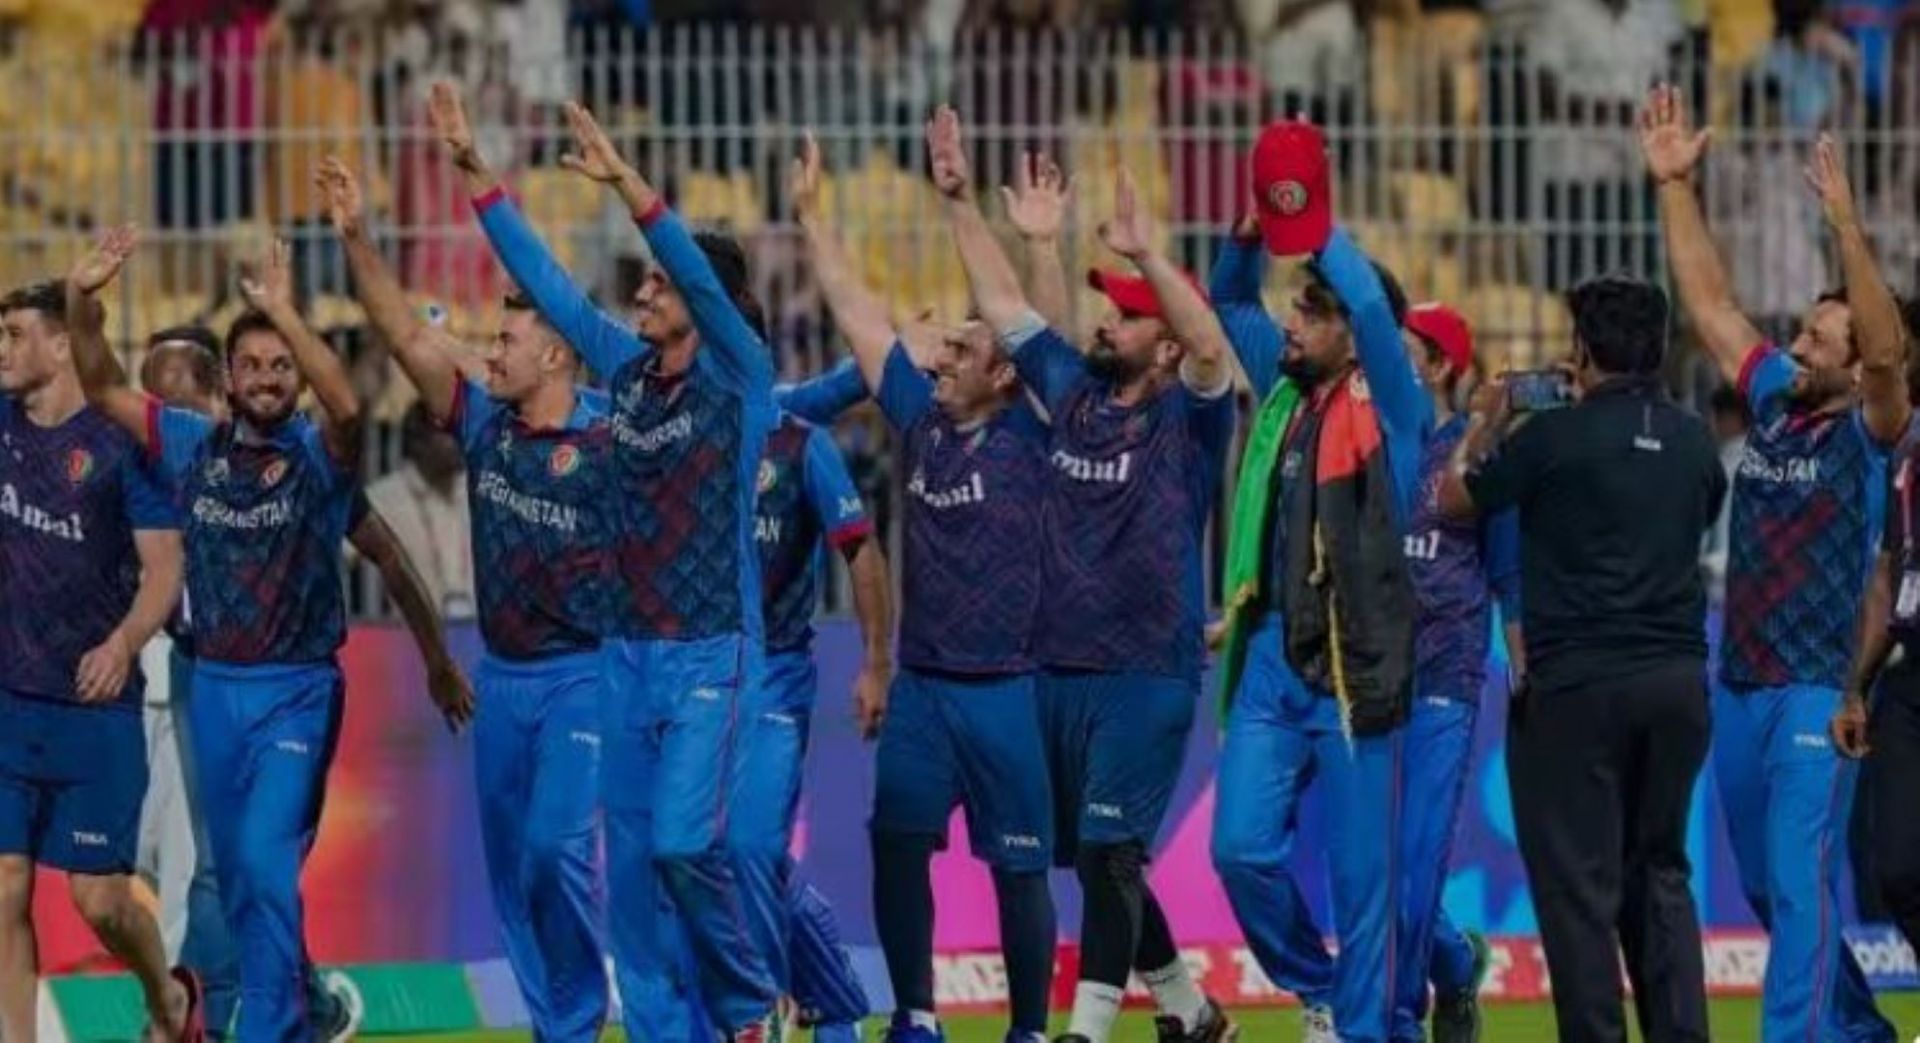 Afghanistan have produced two of the biggest upsets of the World Cup